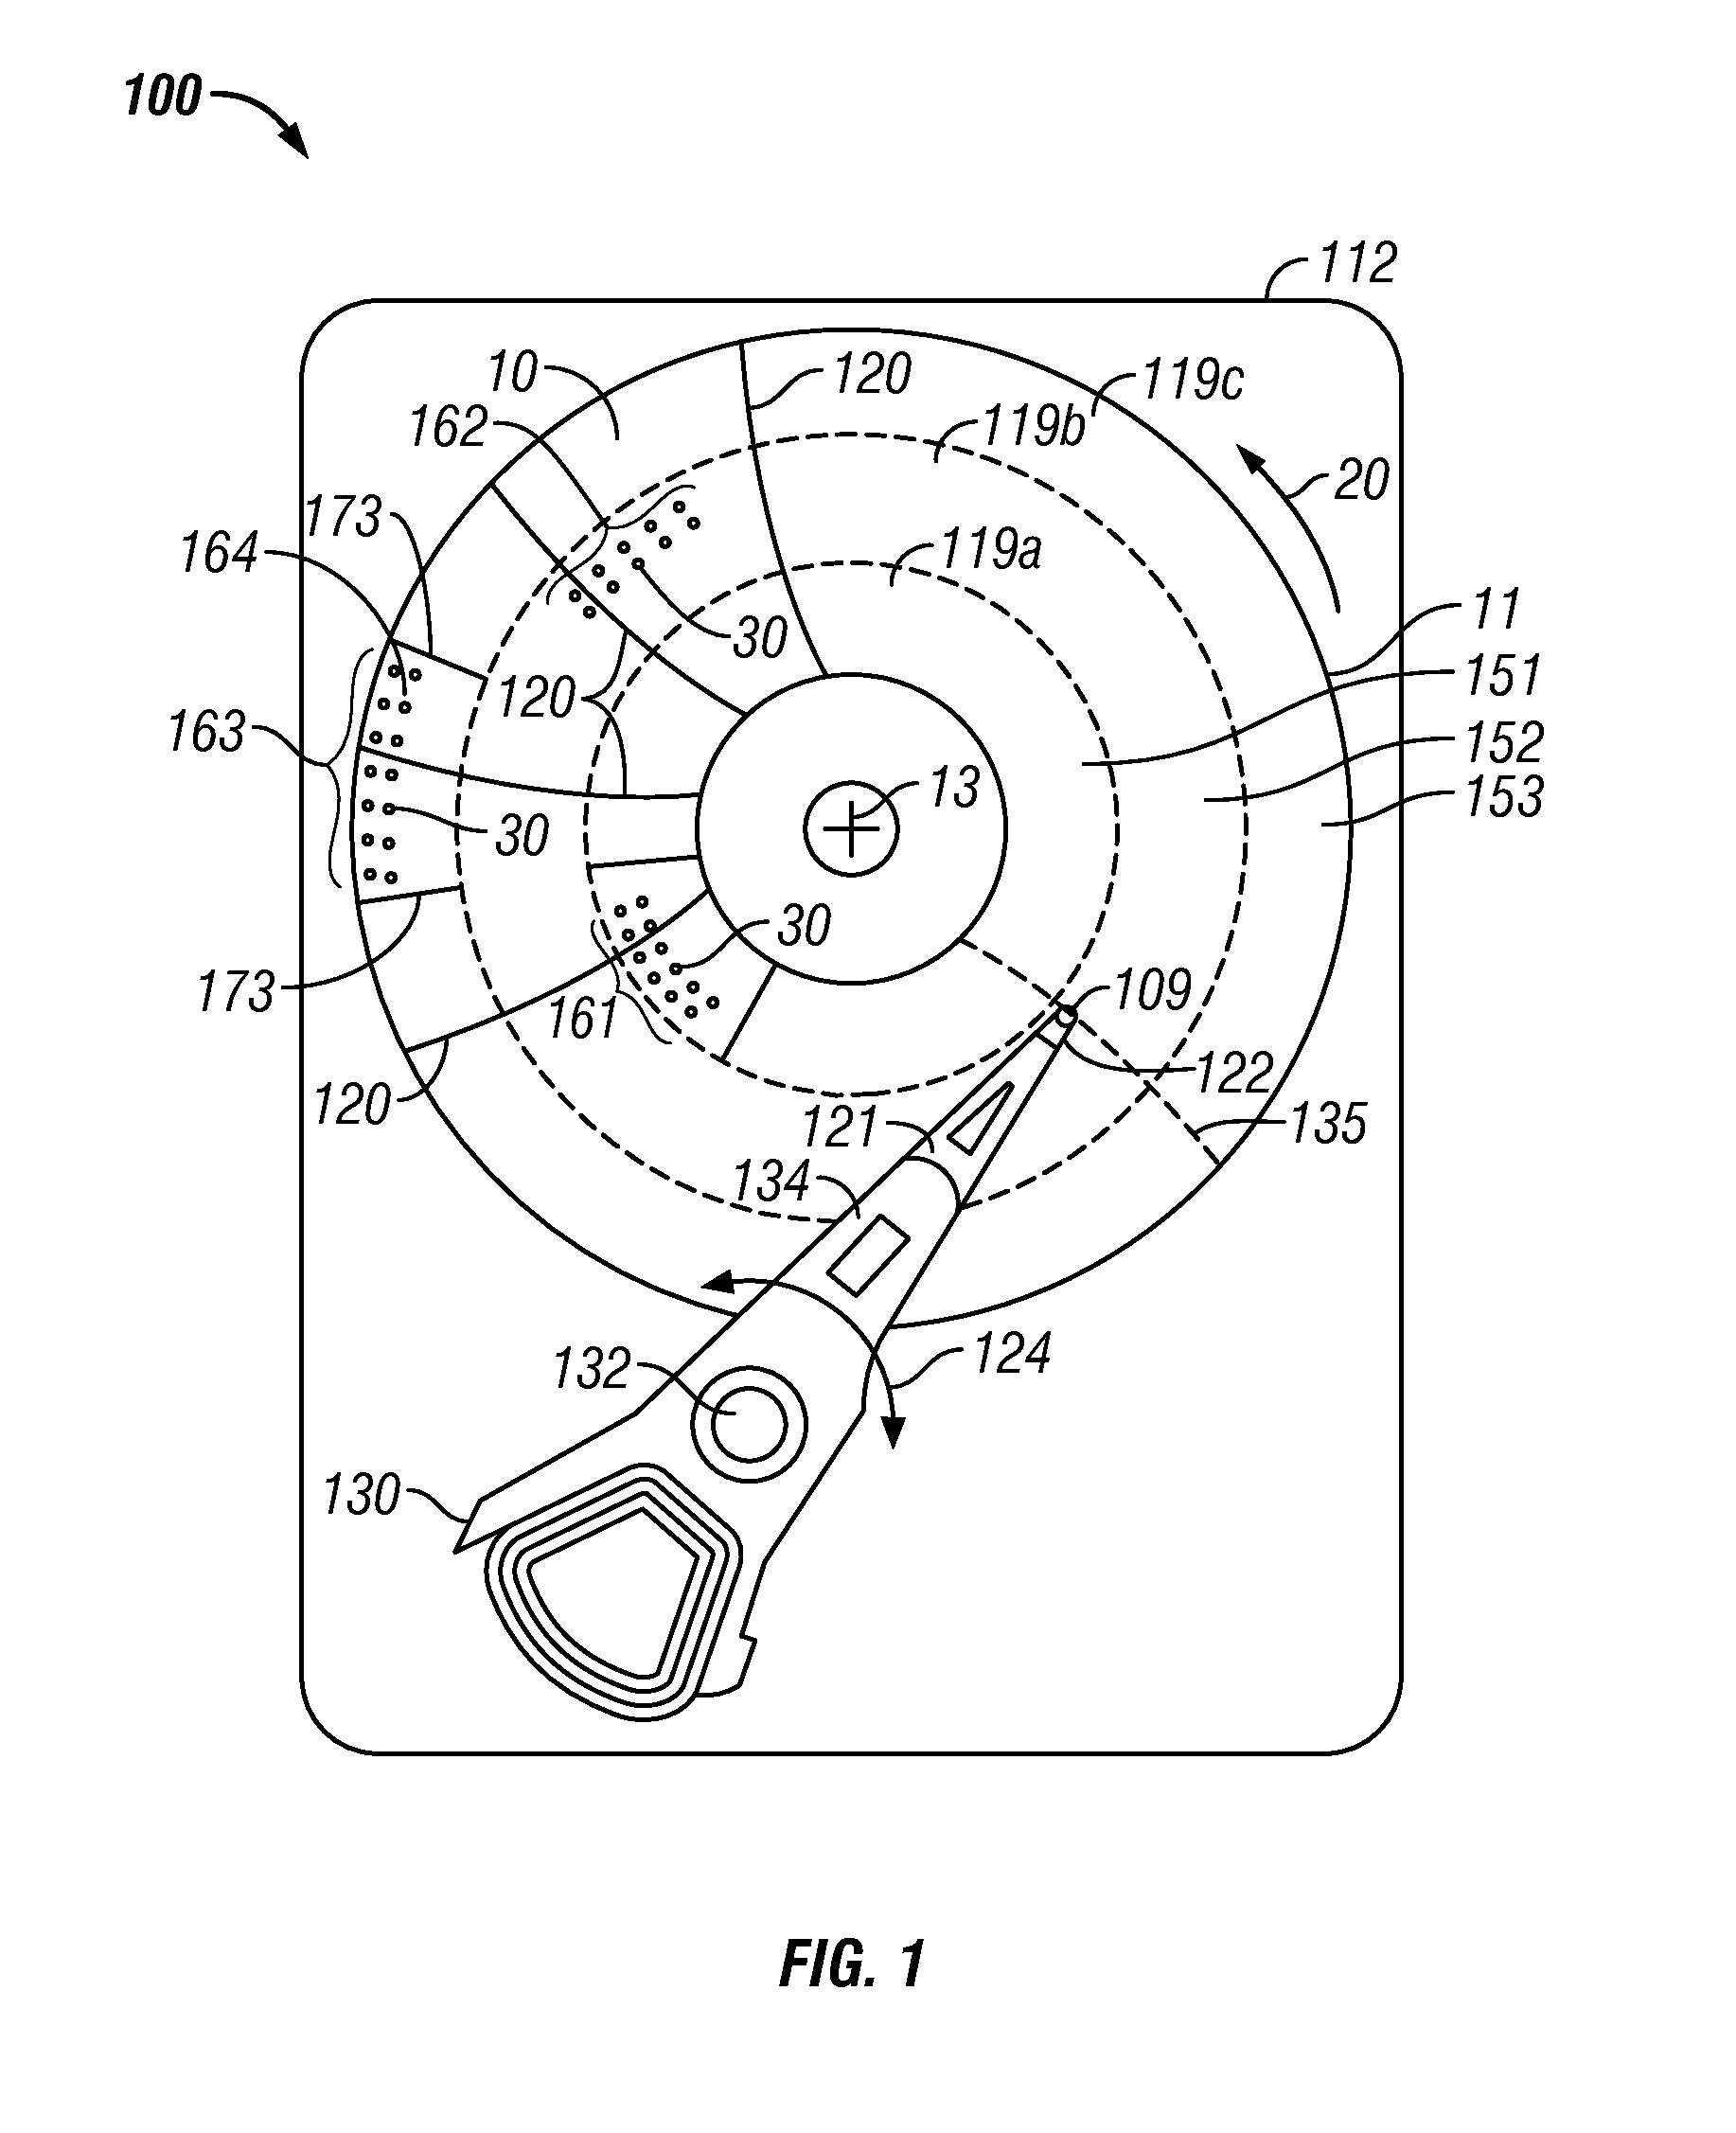 Patterned-media magnetic recording disk drive with data island misplacement information in the servo sectors